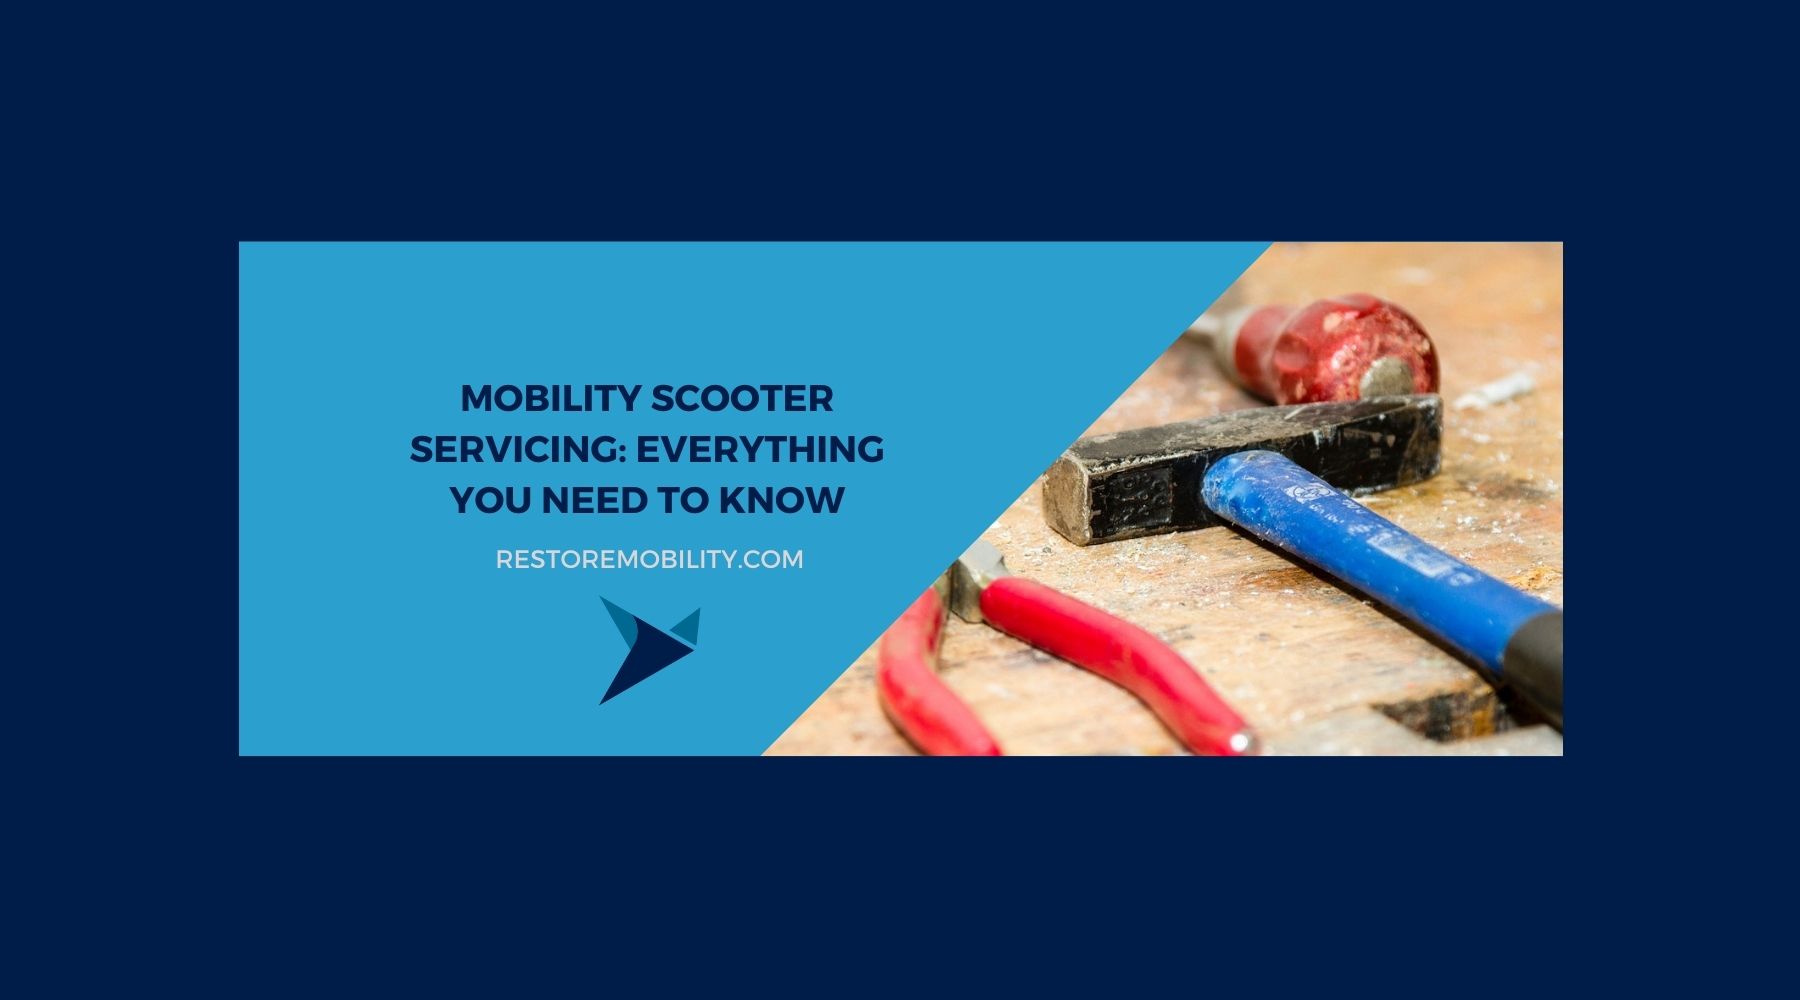 Mobility Scooter Servicing: Everything You Need To Know